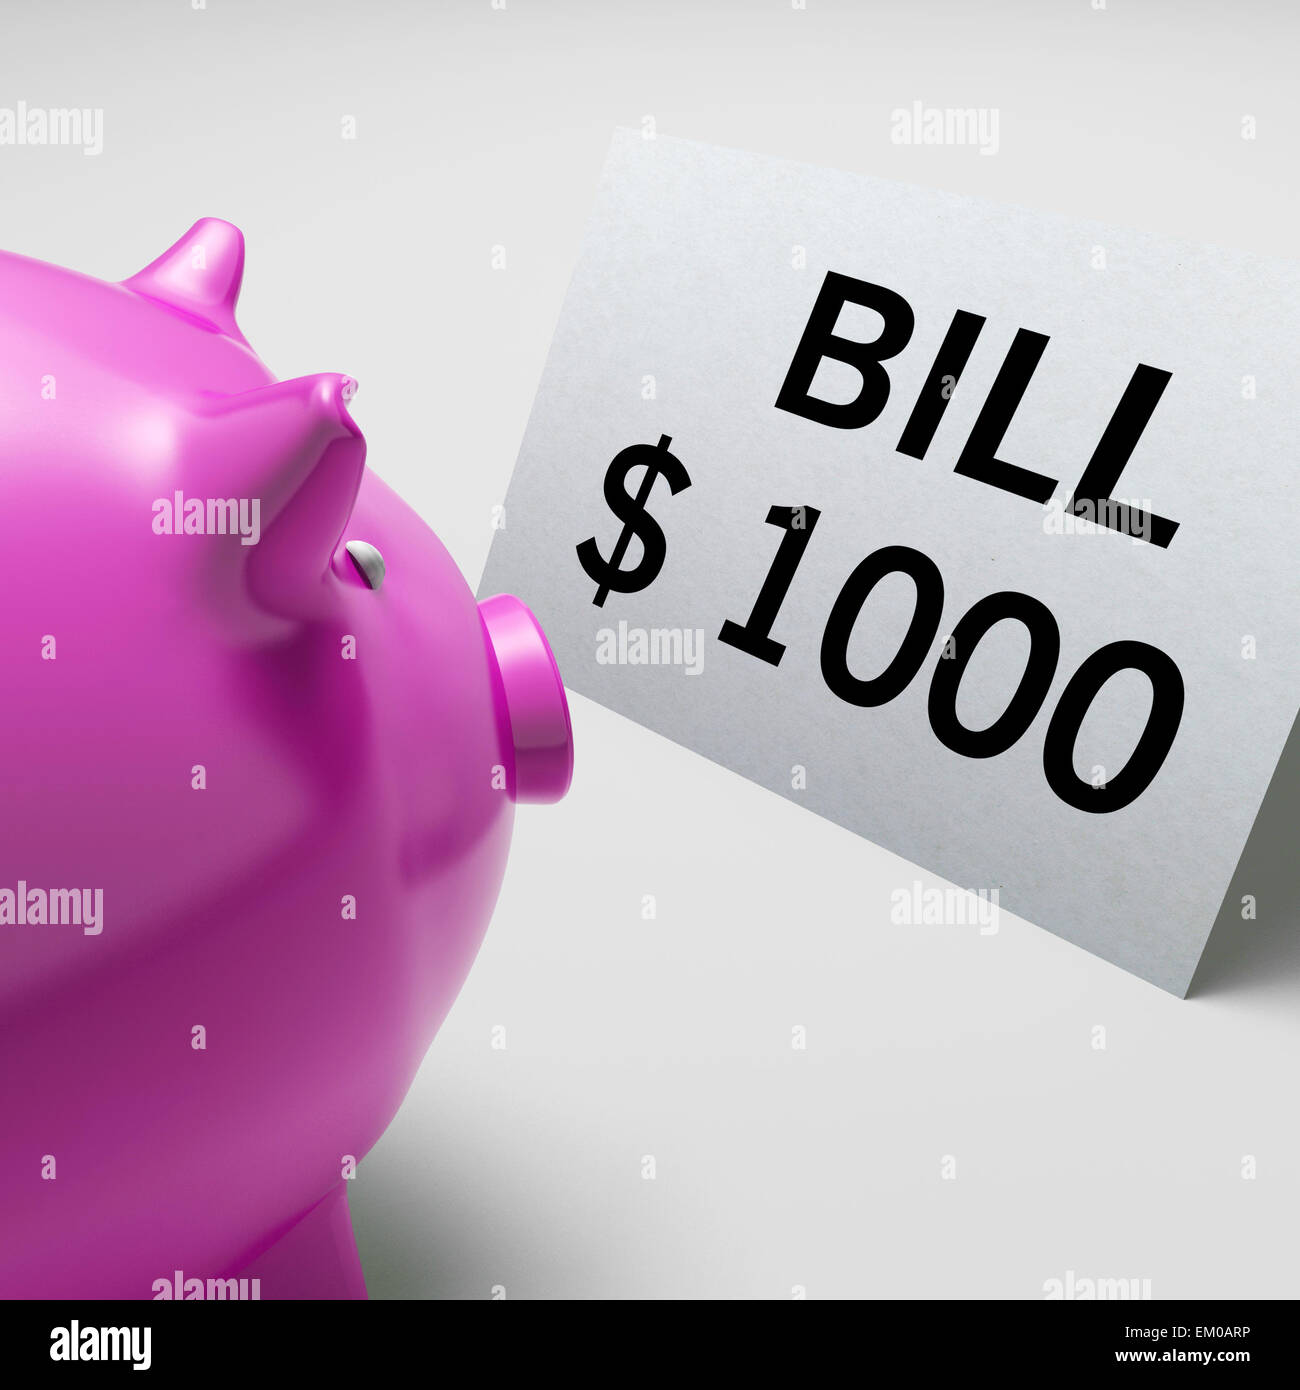 Bills Dollars Shows Invoices Payable And Accounting Stock Photo